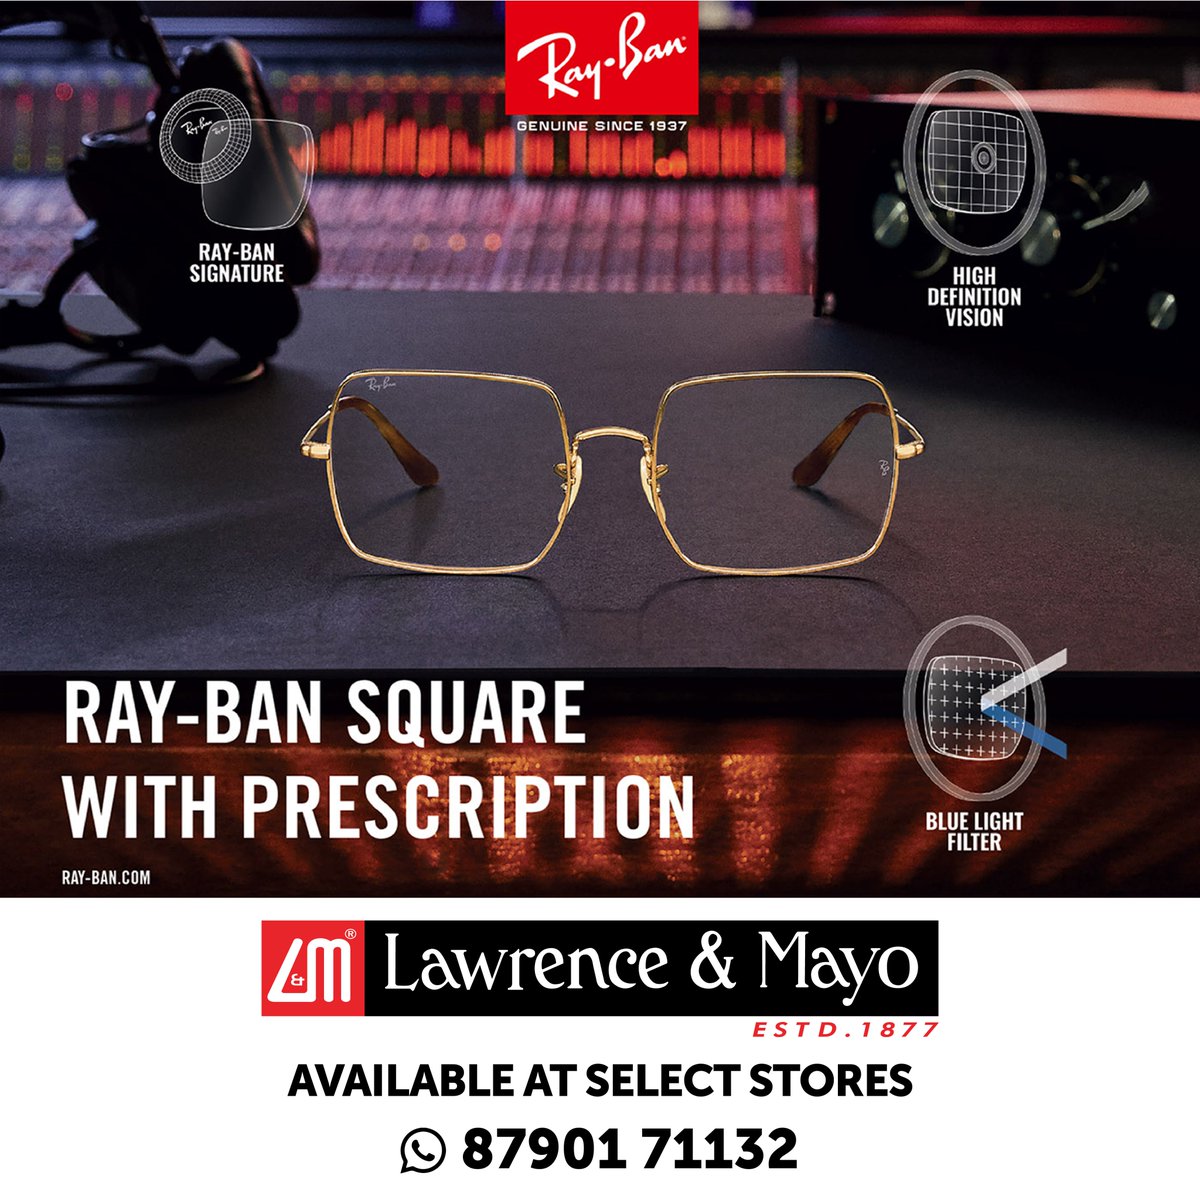 Lawrence And Mayo Introducing New Authentic Ray Ban Prescription Lenses Get Yours In Iconic Ray Ban Sunglasses Frames At Lawrence Mayo Available At Select Stores Lawrenceandmayo Rayban Prescriptionlenses Sunglasses T Co